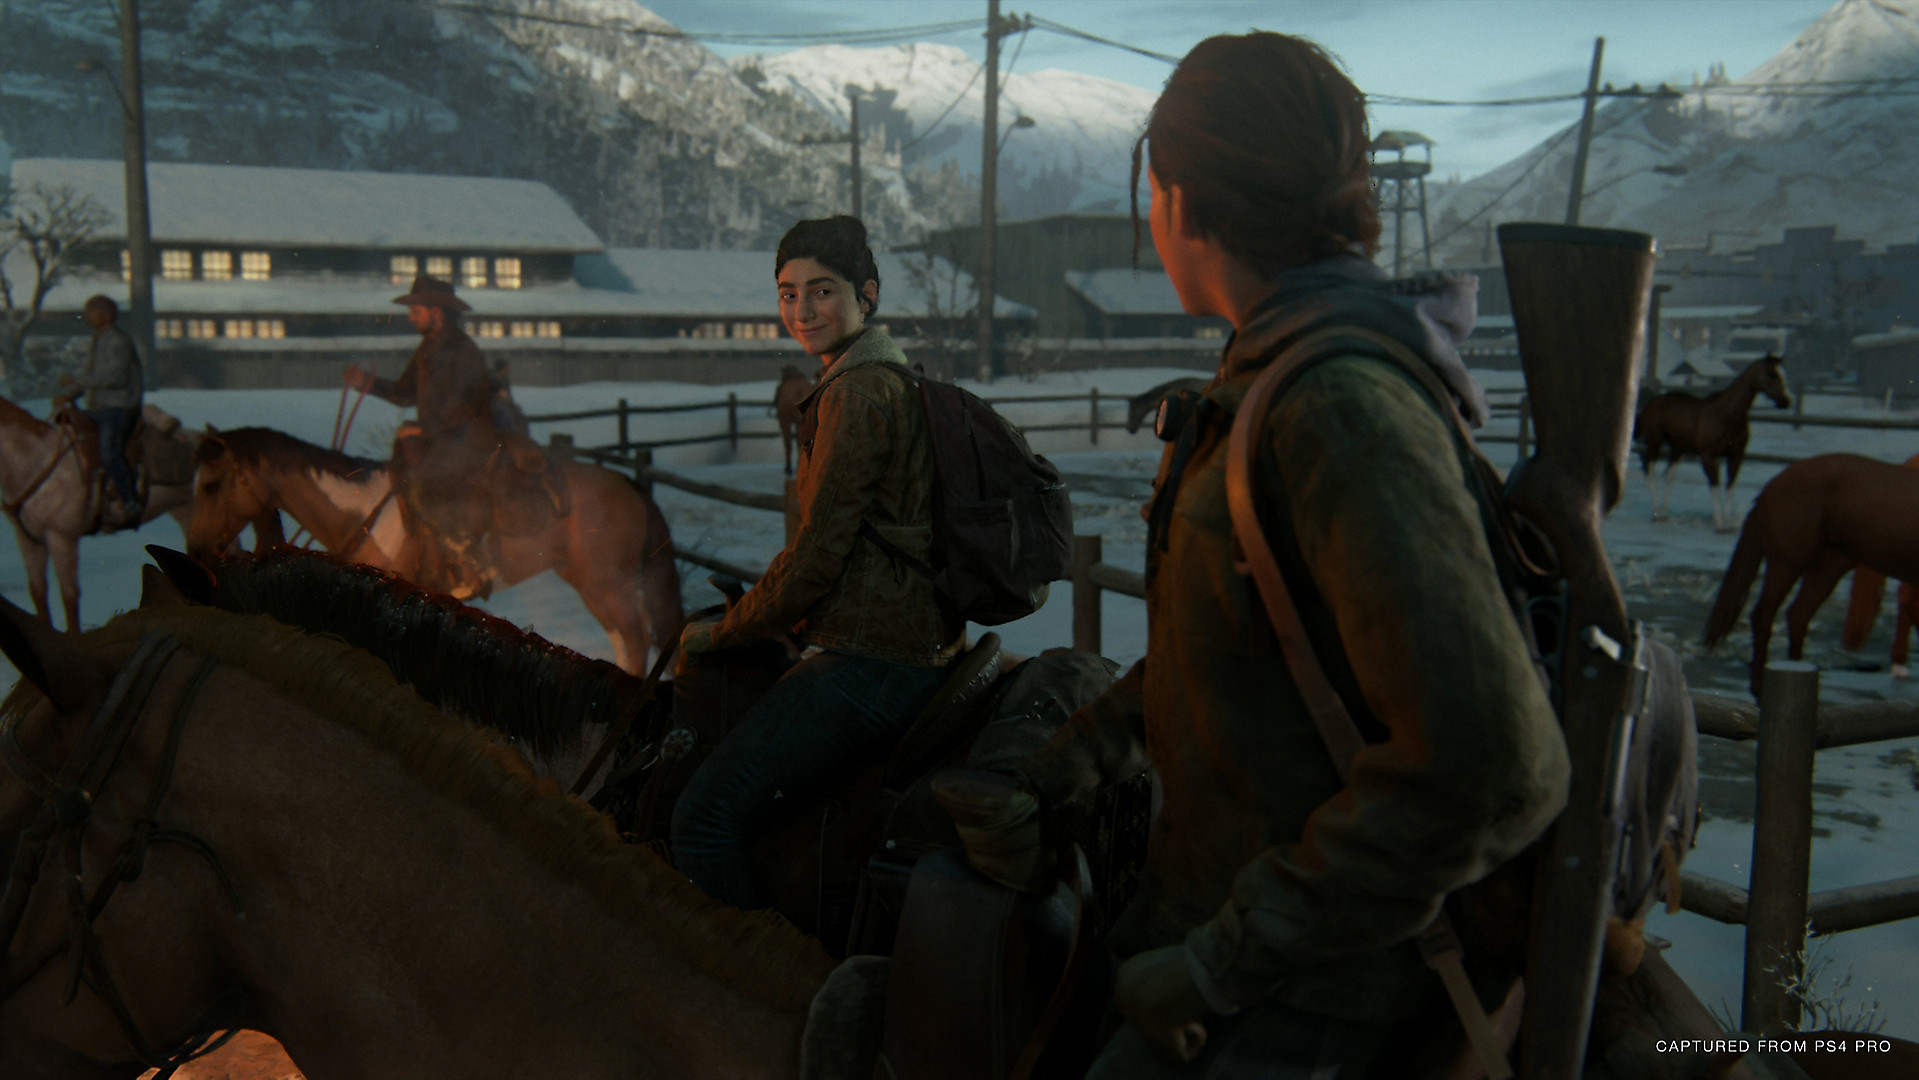 Ellie and Dina ride horses in The Last of Us Part II